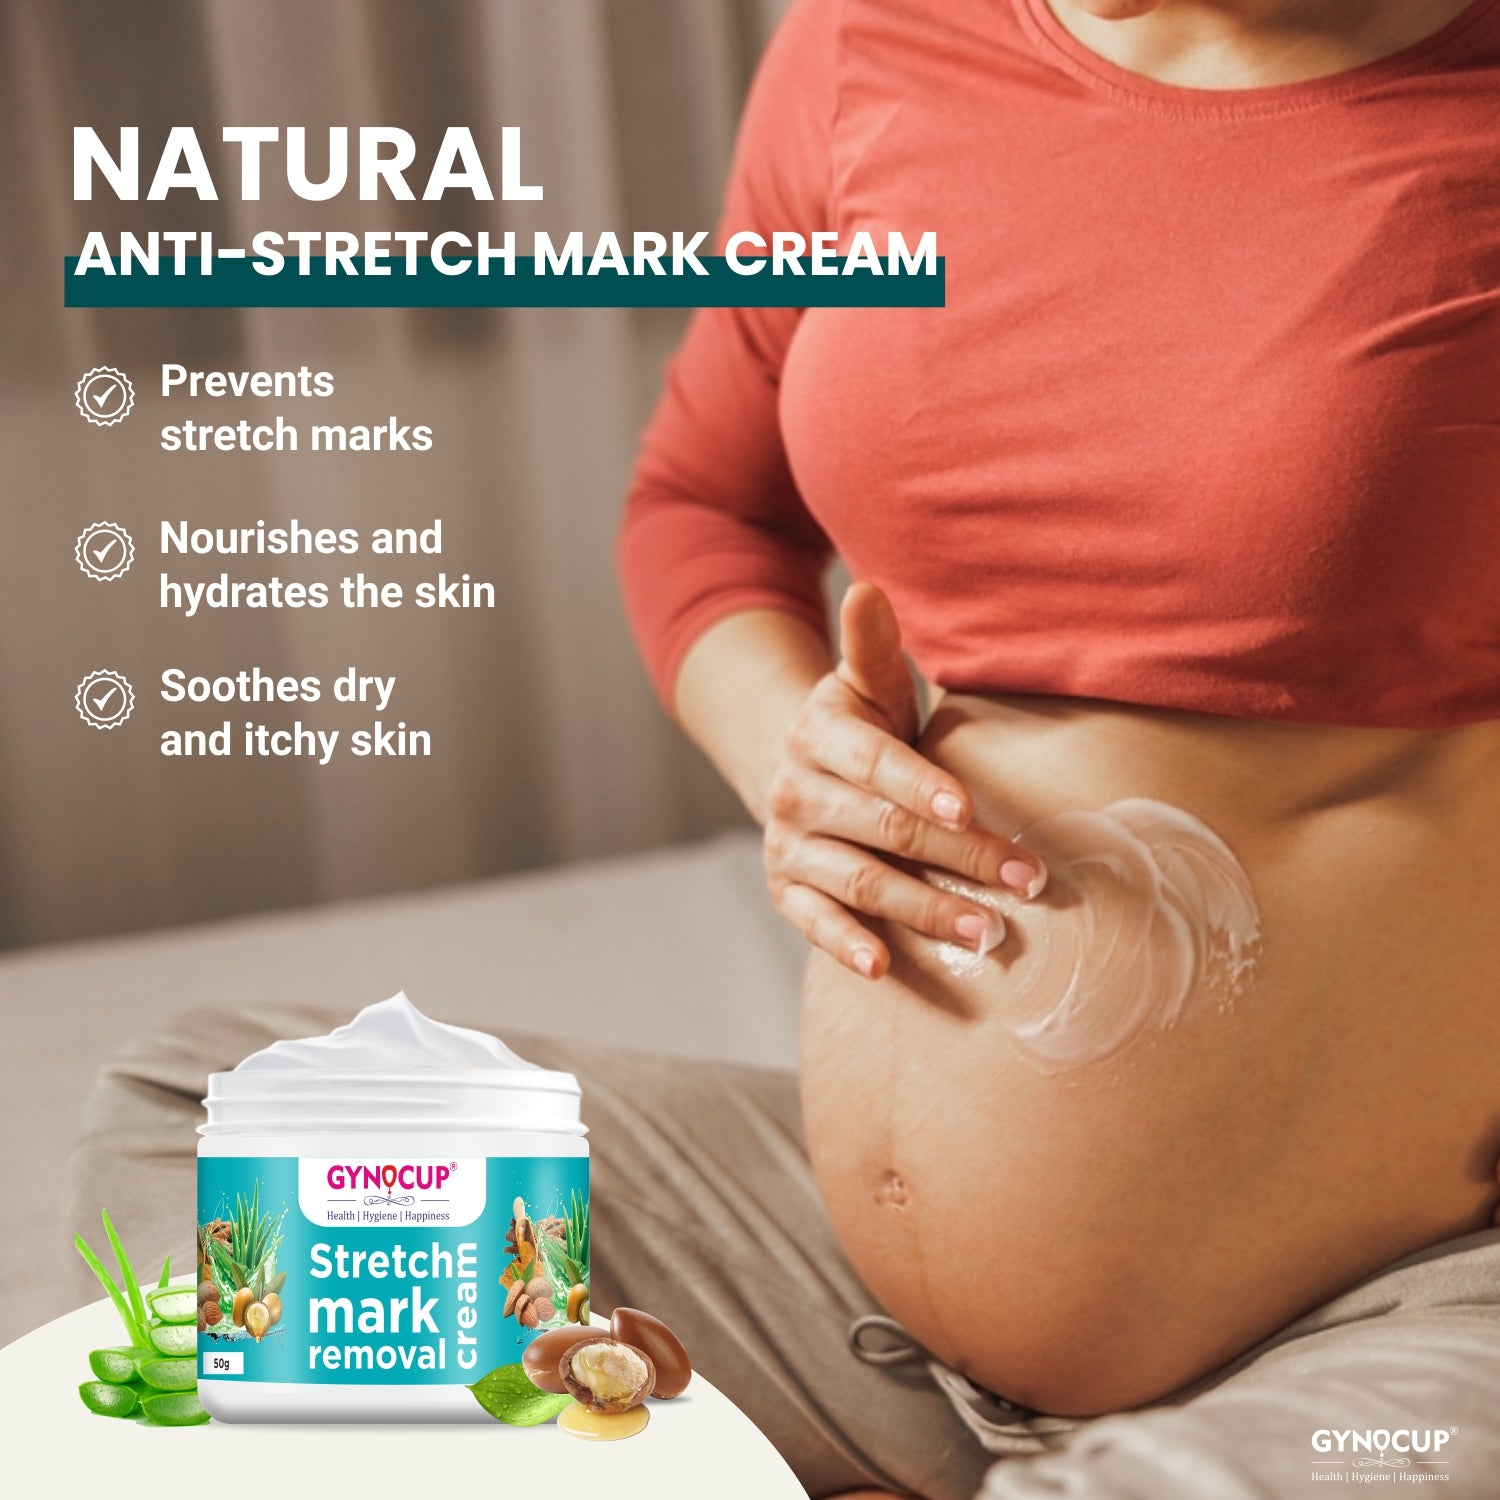 Flawless Skin Ahead: Stretch Mark Removal Cream for All Skin Types (50g)